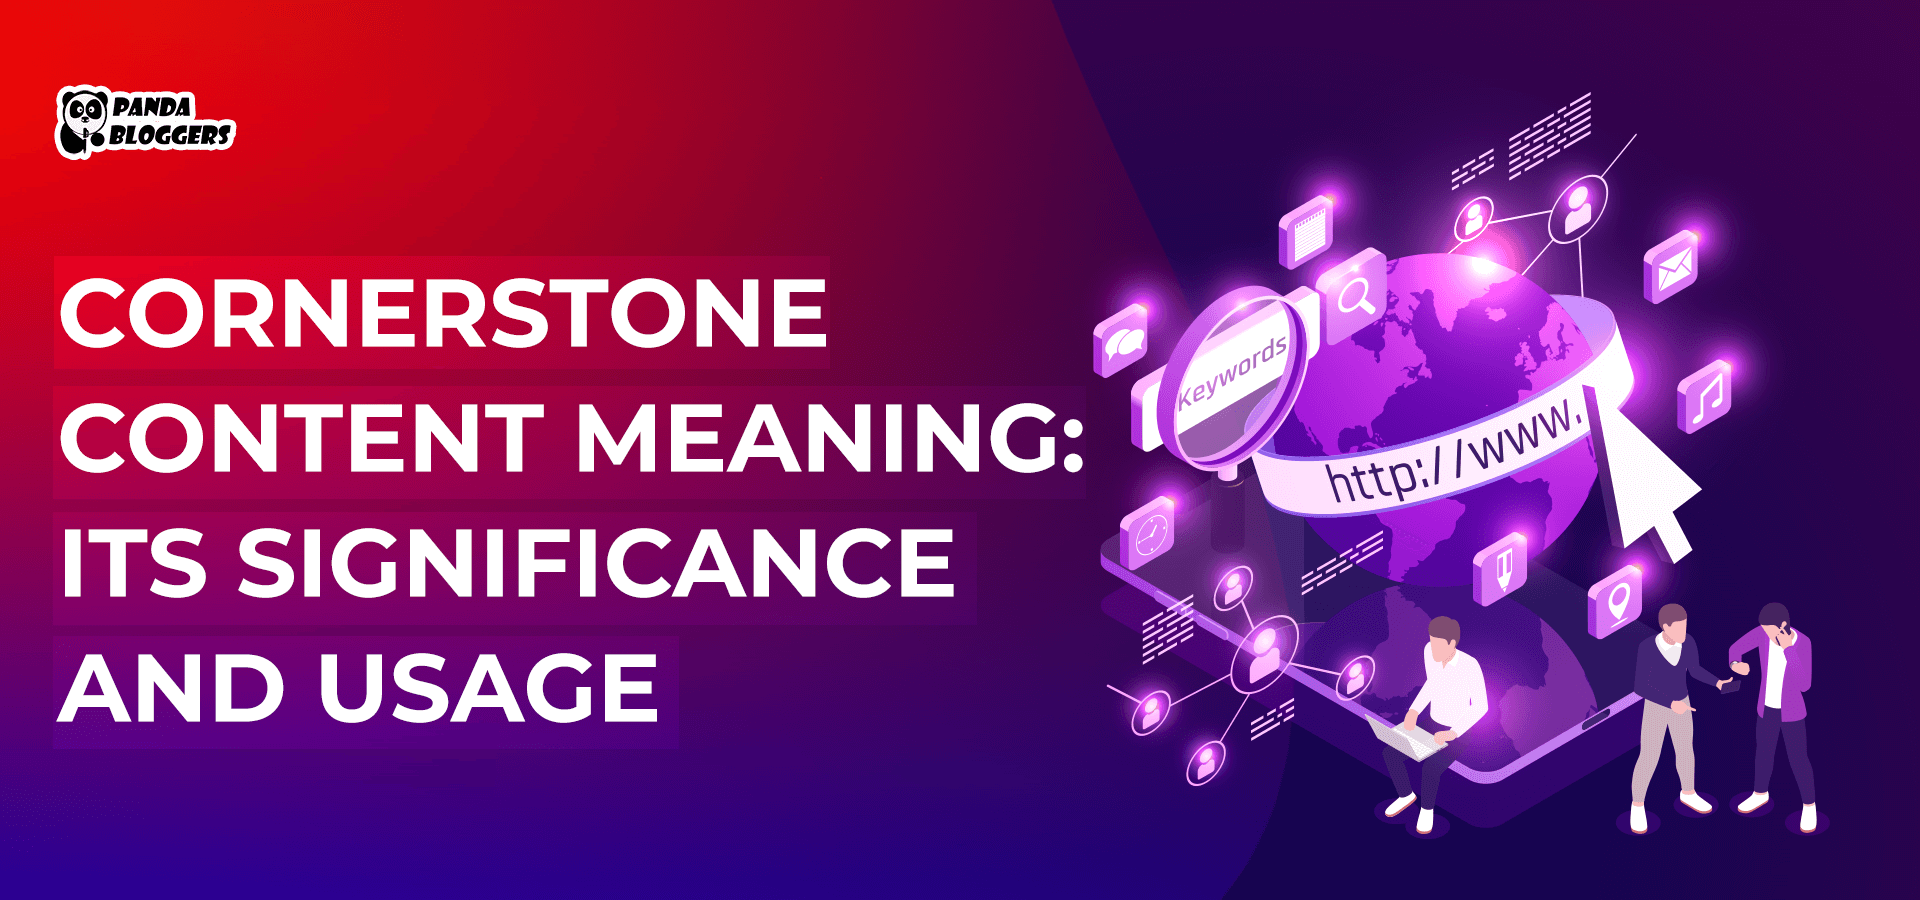 Cornerstone Content Meaning: What is Cornerstone Content